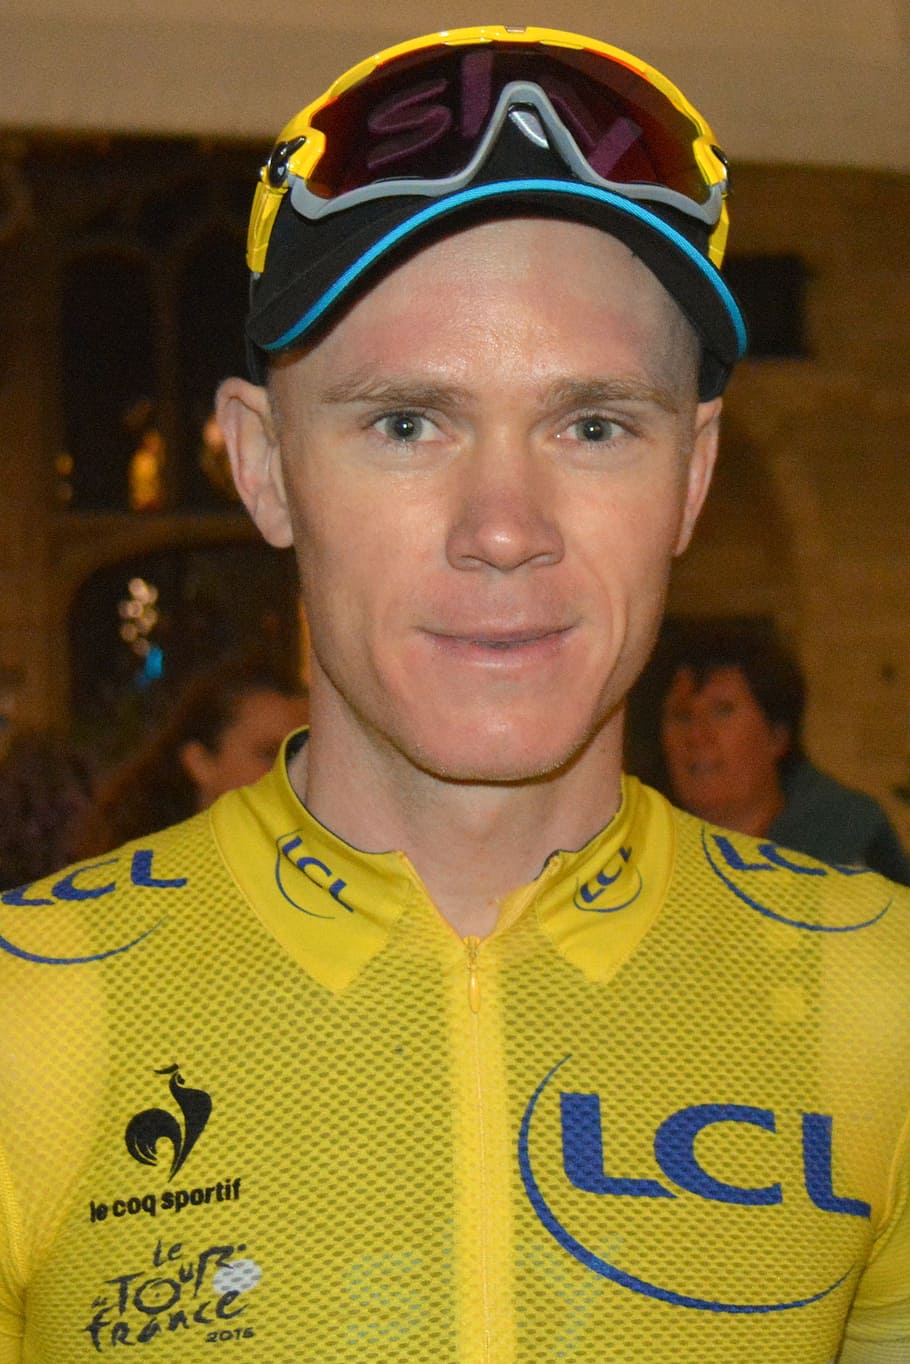 chris froome, champion, yellow jersey, celebrity, cyclist, professional road bicycle racer, man, people, winner, portrait